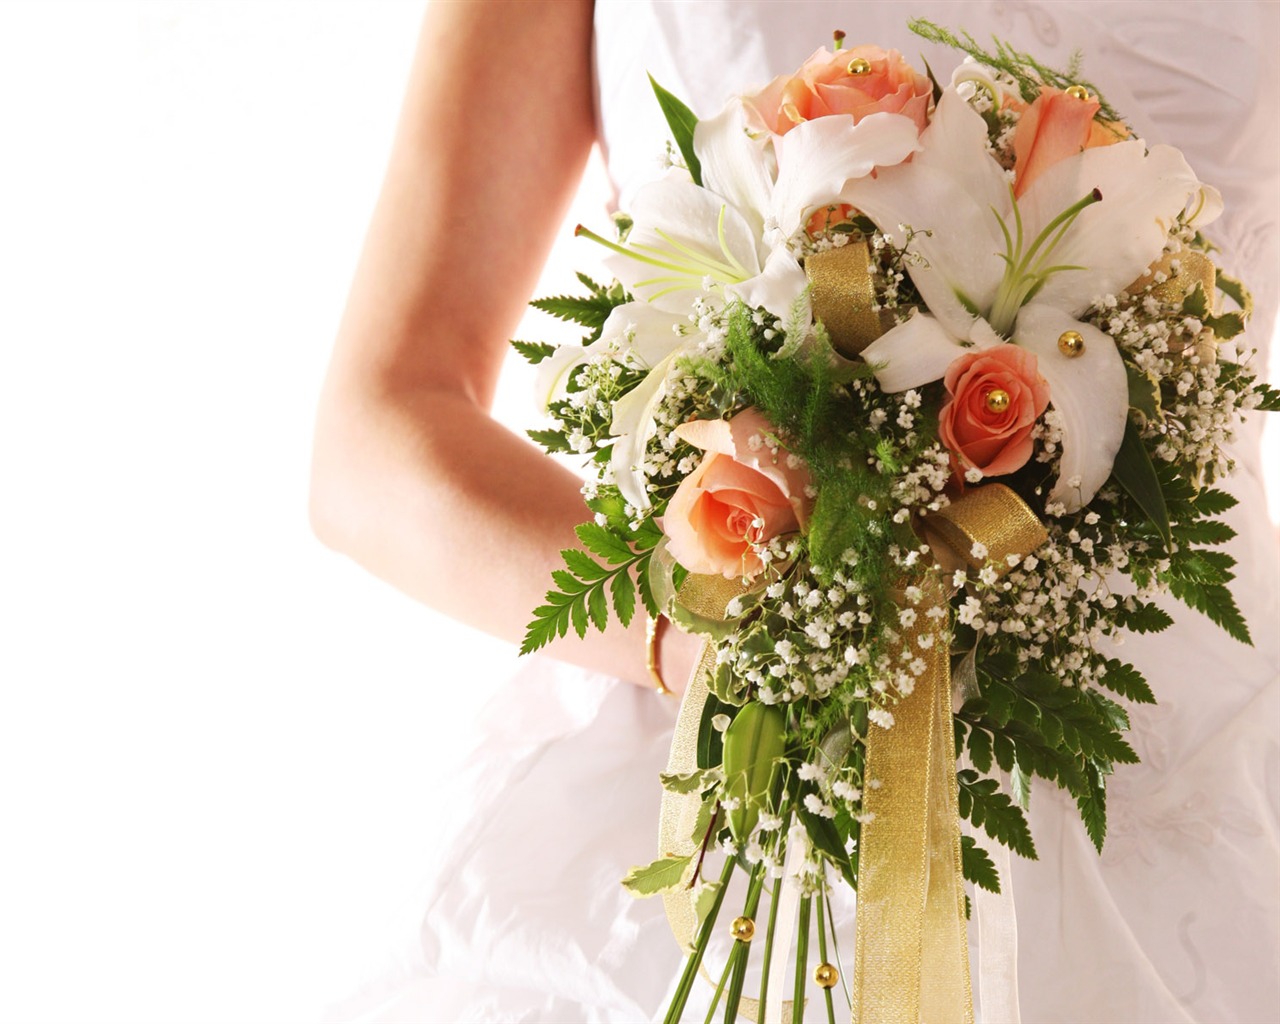 Weddings and Flowers wallpaper (1) #12 - 1280x1024